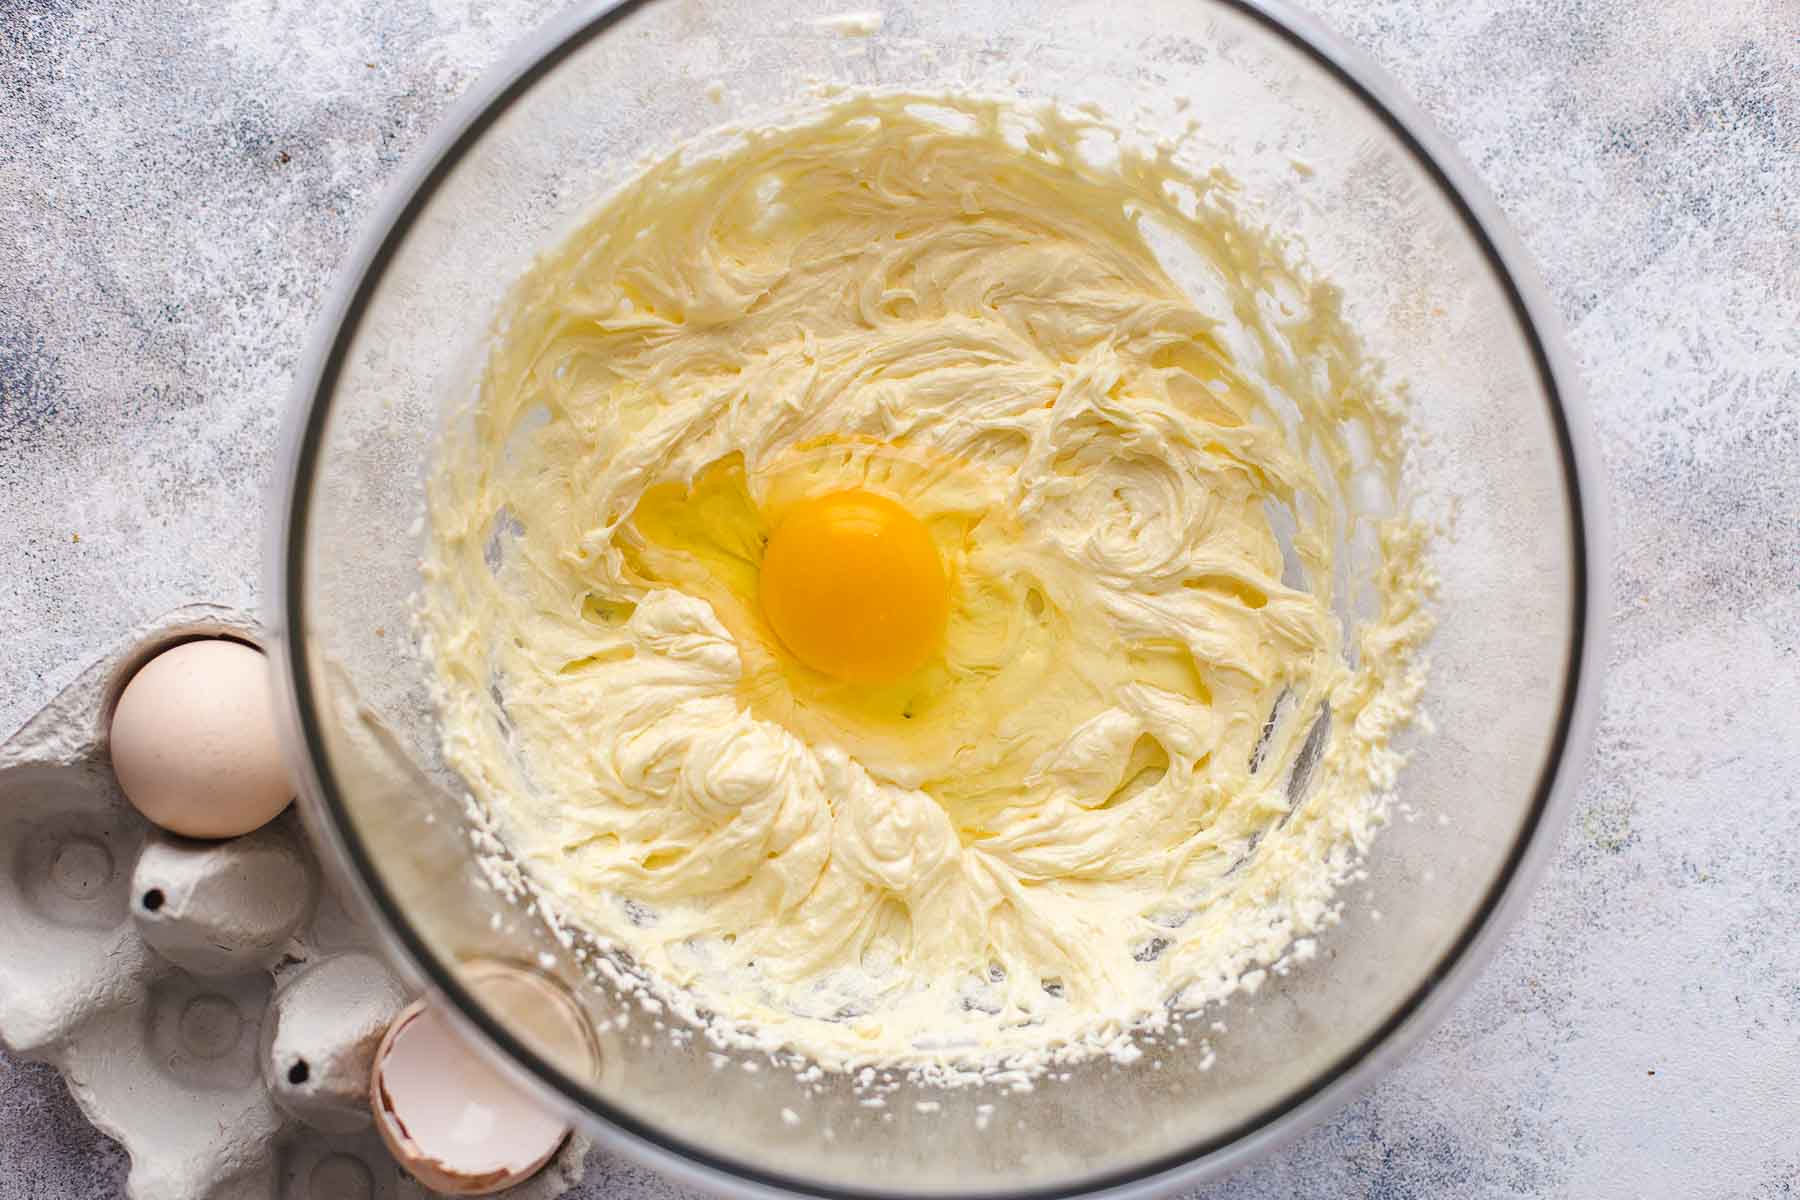 Mixing progress: adding second egg to the batter